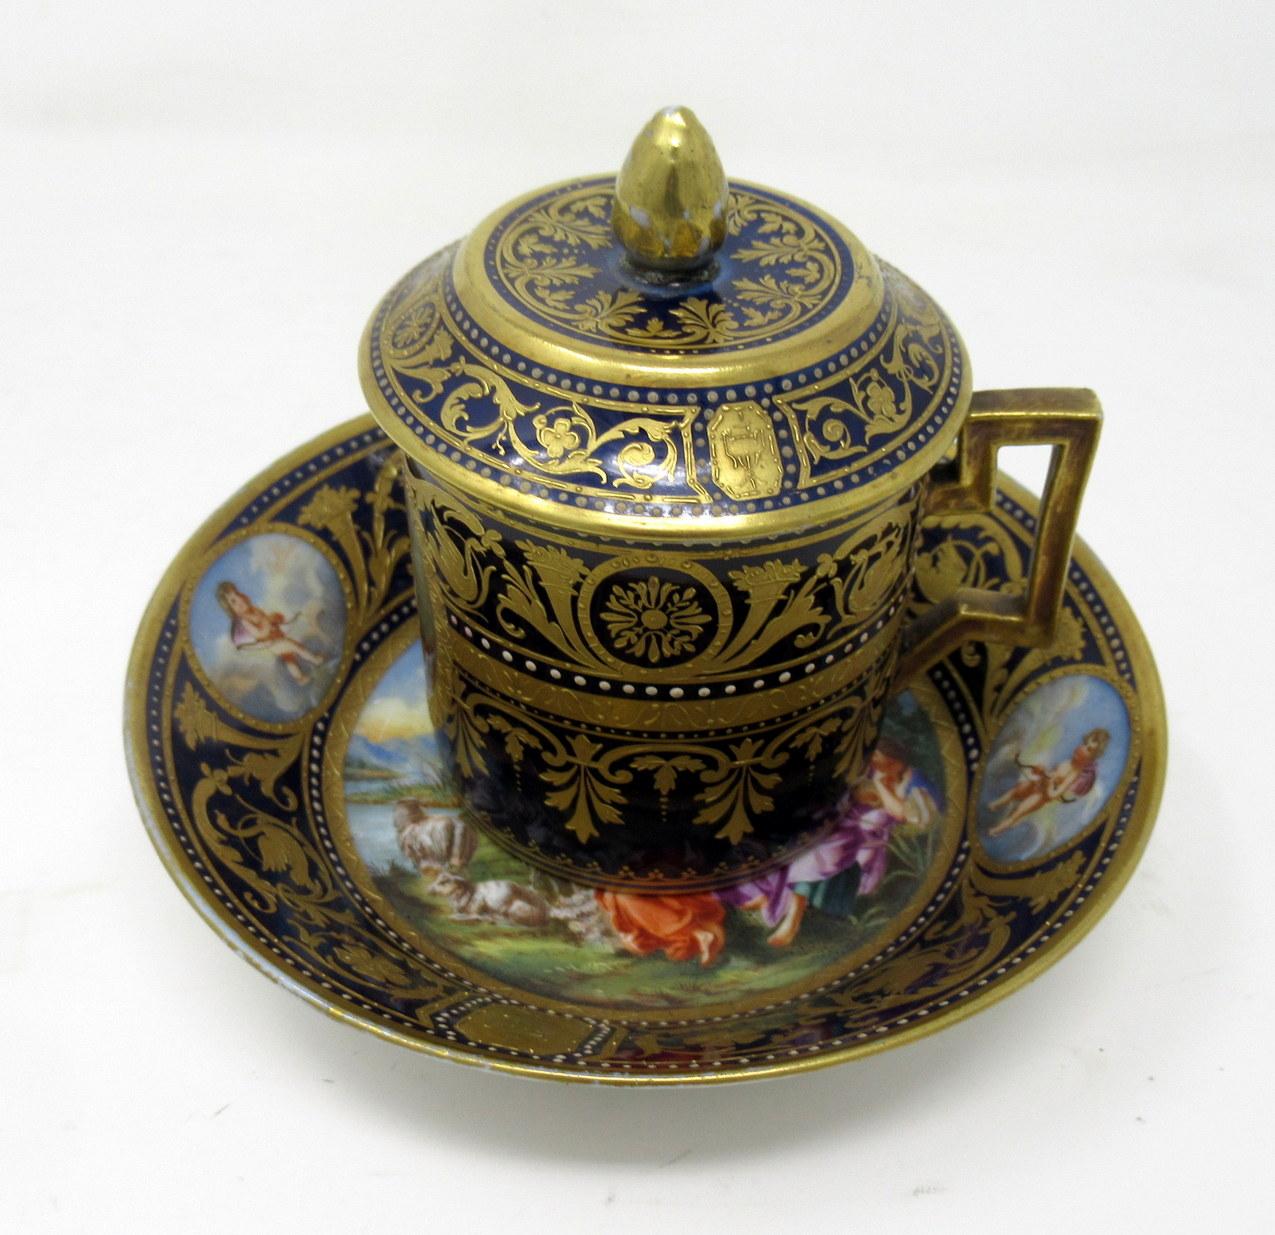 An exceptional Vienna porcelain hand decorated miniature chocolate cup with cover and circular stand of exhibition quality, of cylindrical form with bracket handle, circa last quarter of the 19th century, possibly earlier. 

The circular stand